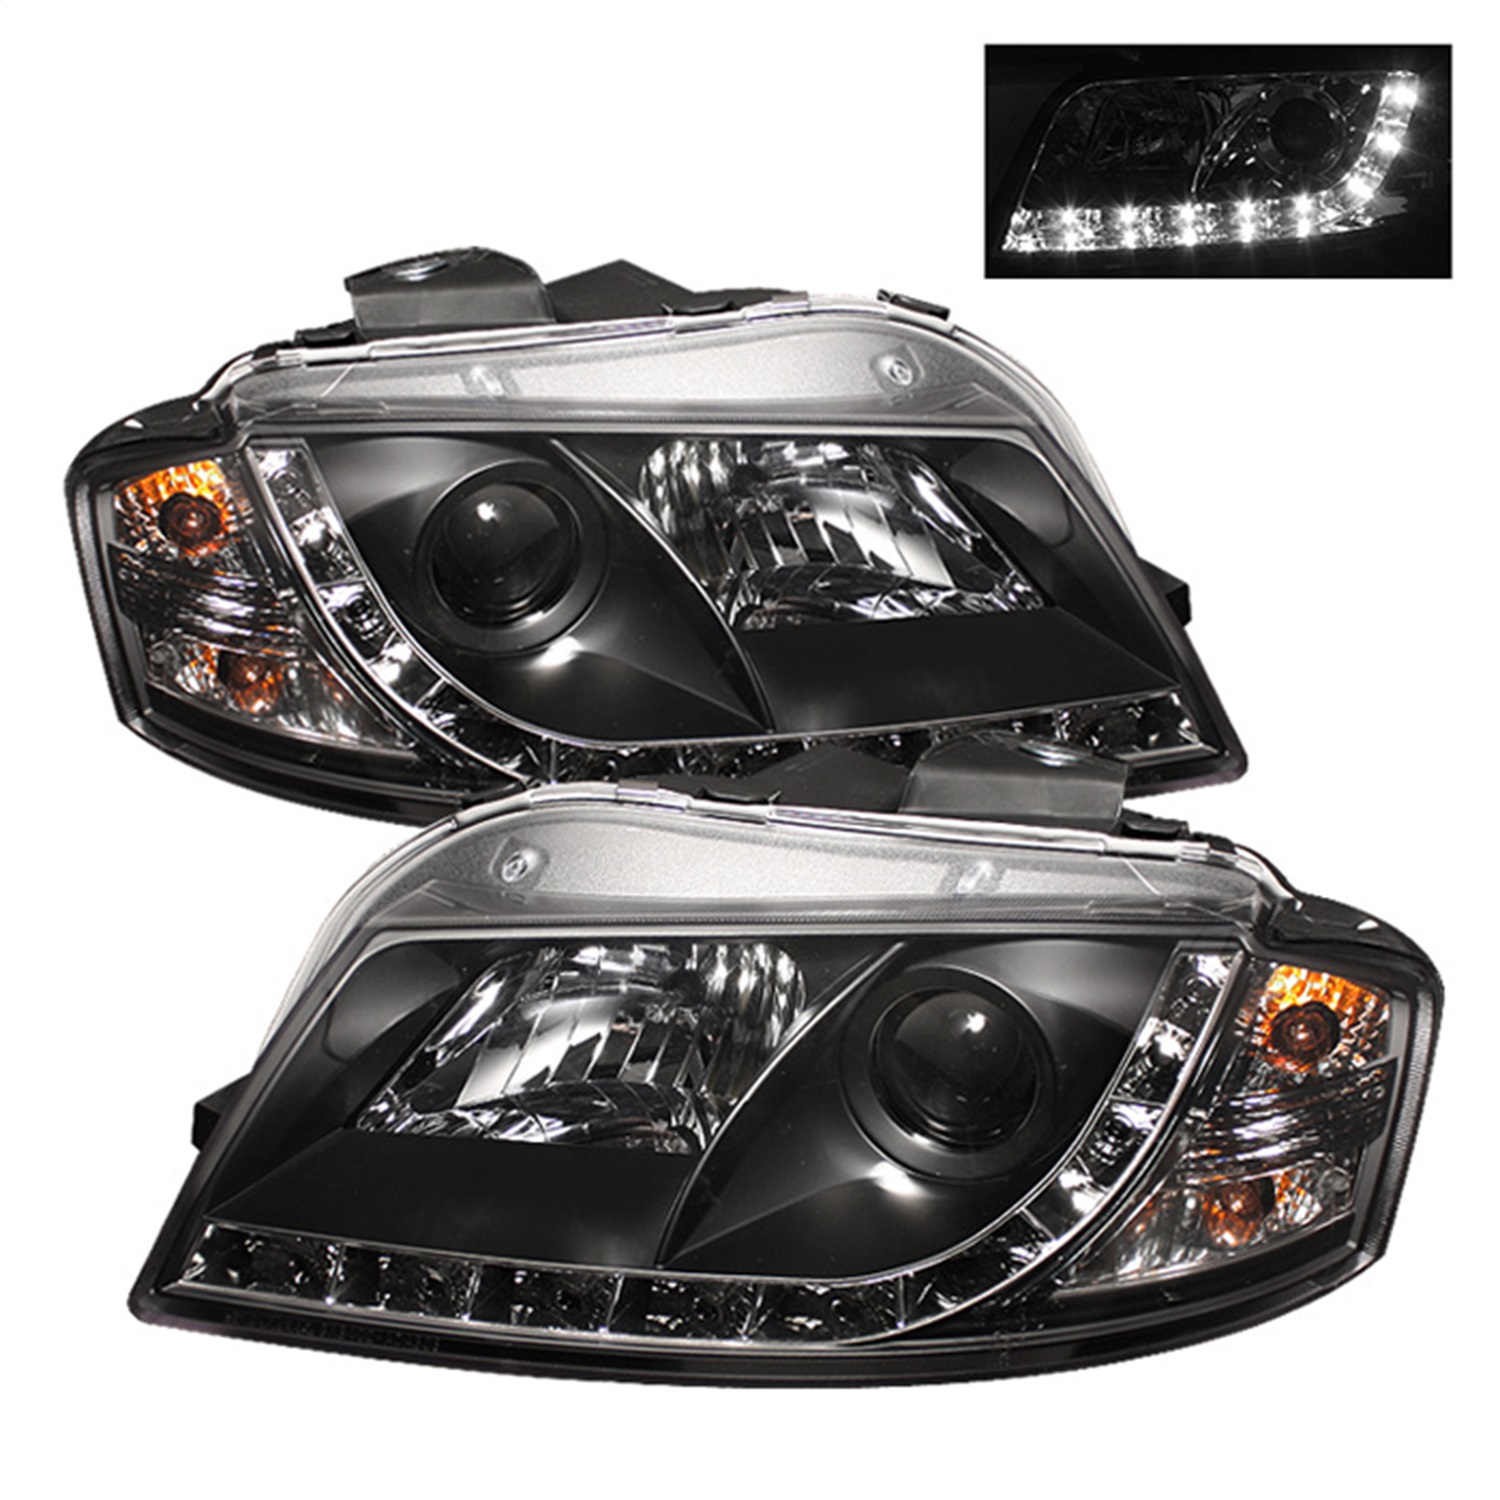 Spyder Auto 5008510 DRL LED Projector Headlights Fits 06-08 A3 A3 Quattro